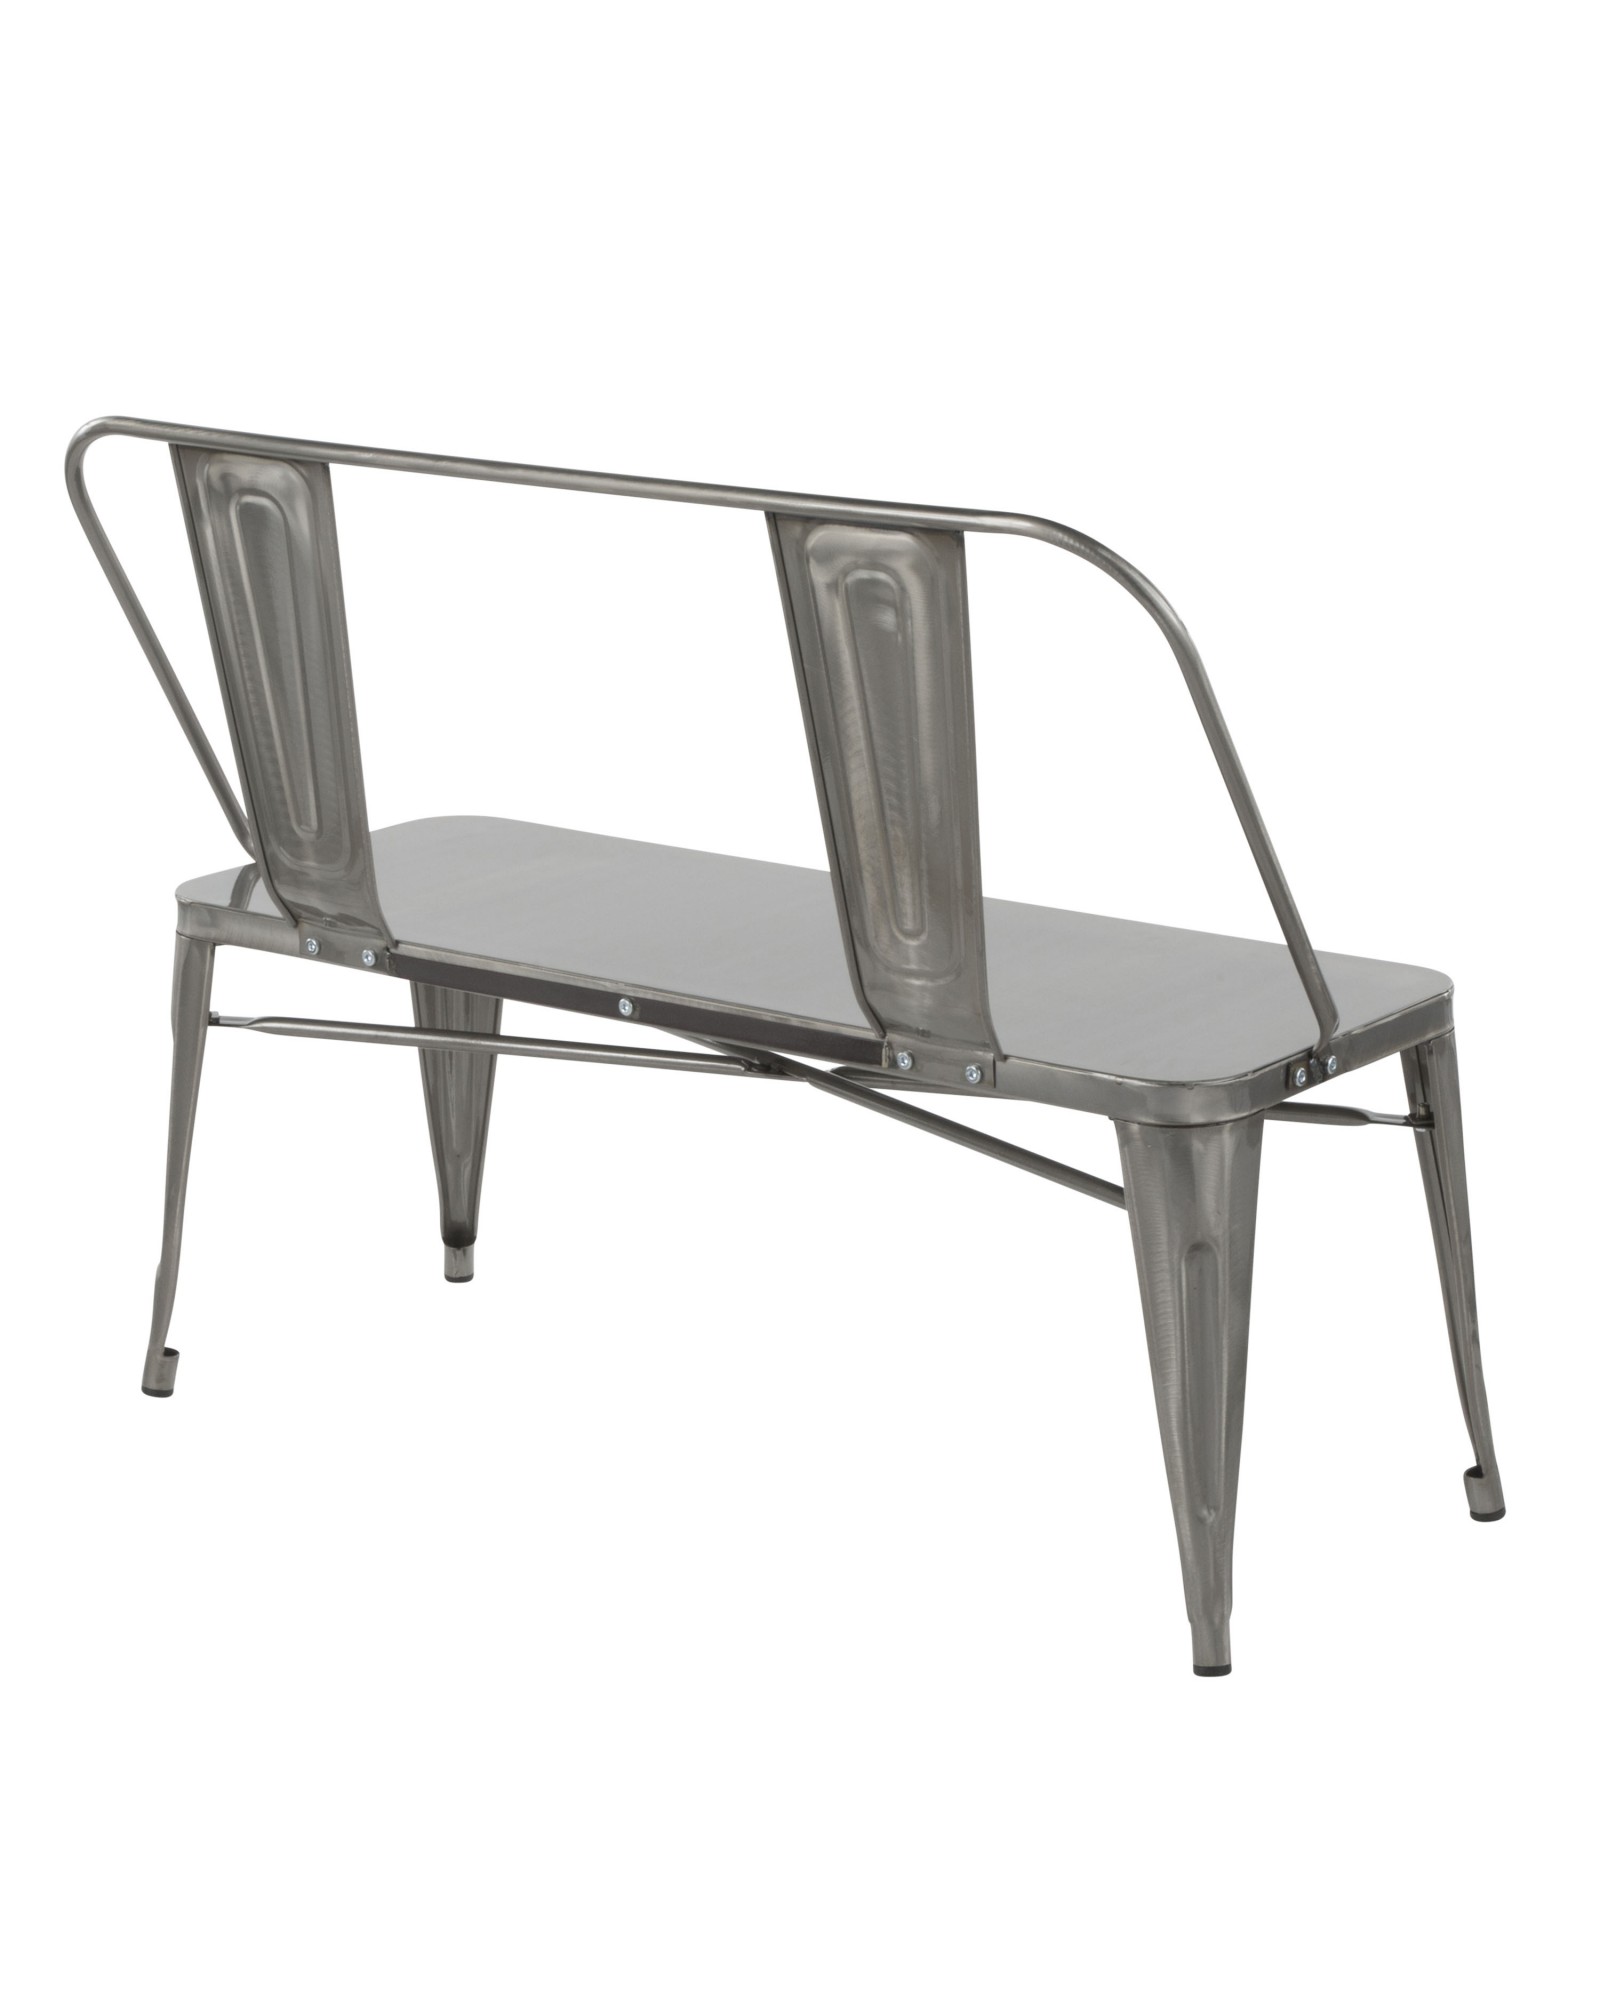 Oregon Industrial Metal Dining/Entryway Bench in Clear Brushed Silver